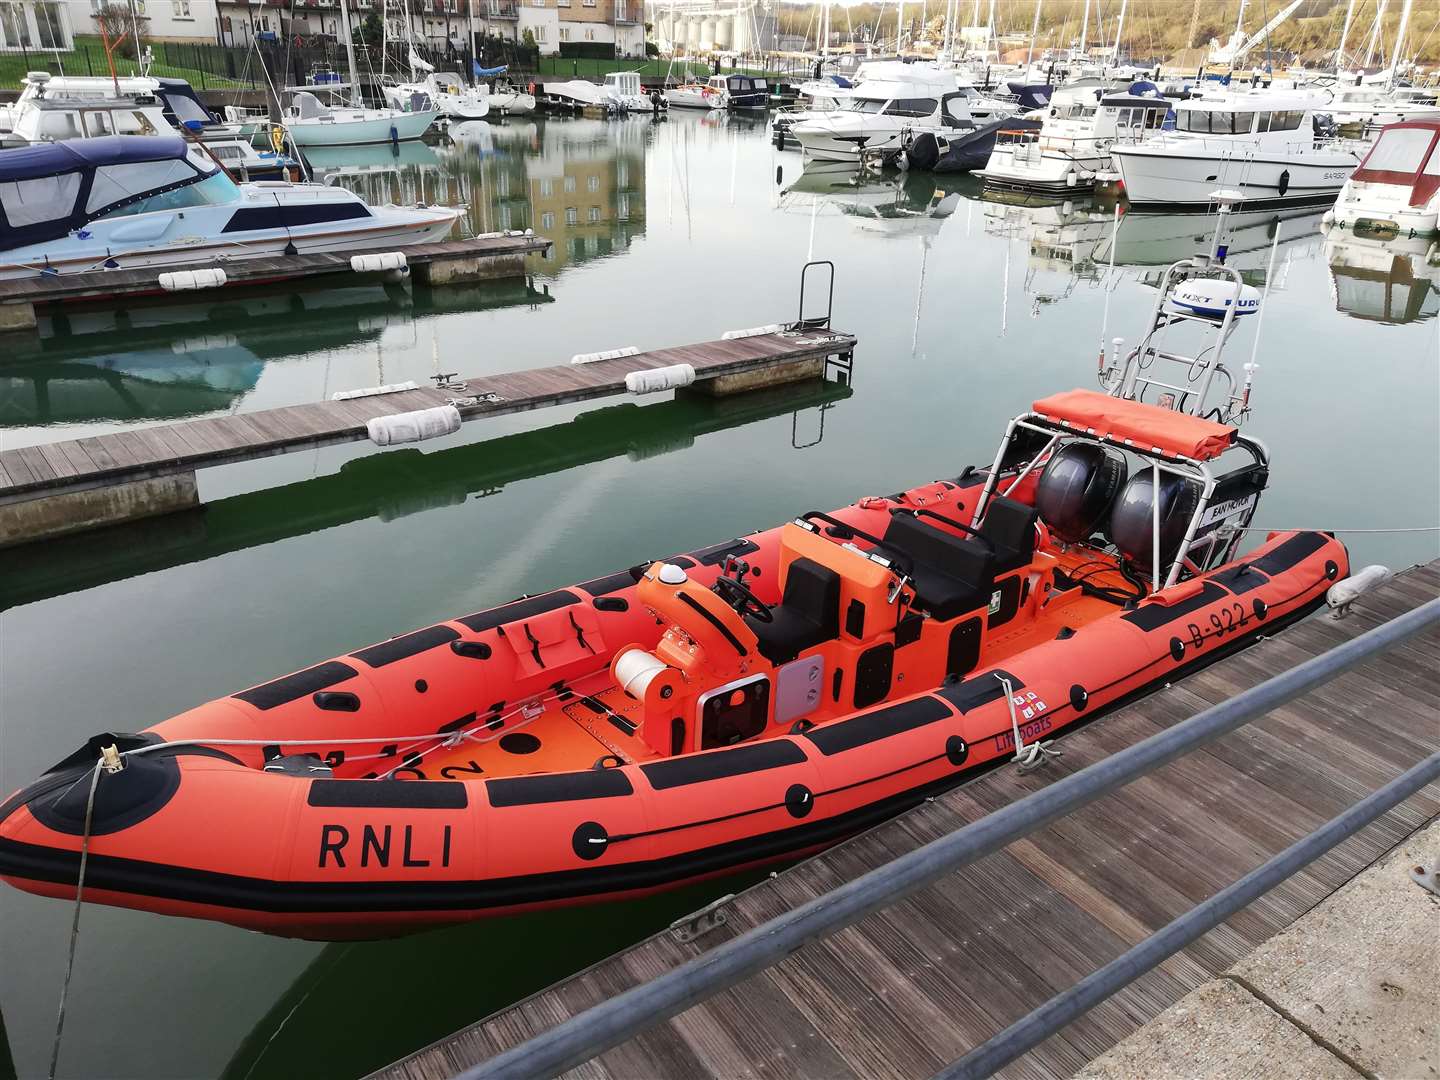 The lifeboat docked at Cowes, where it was built. Photo: RNLI/Gavin Munnings